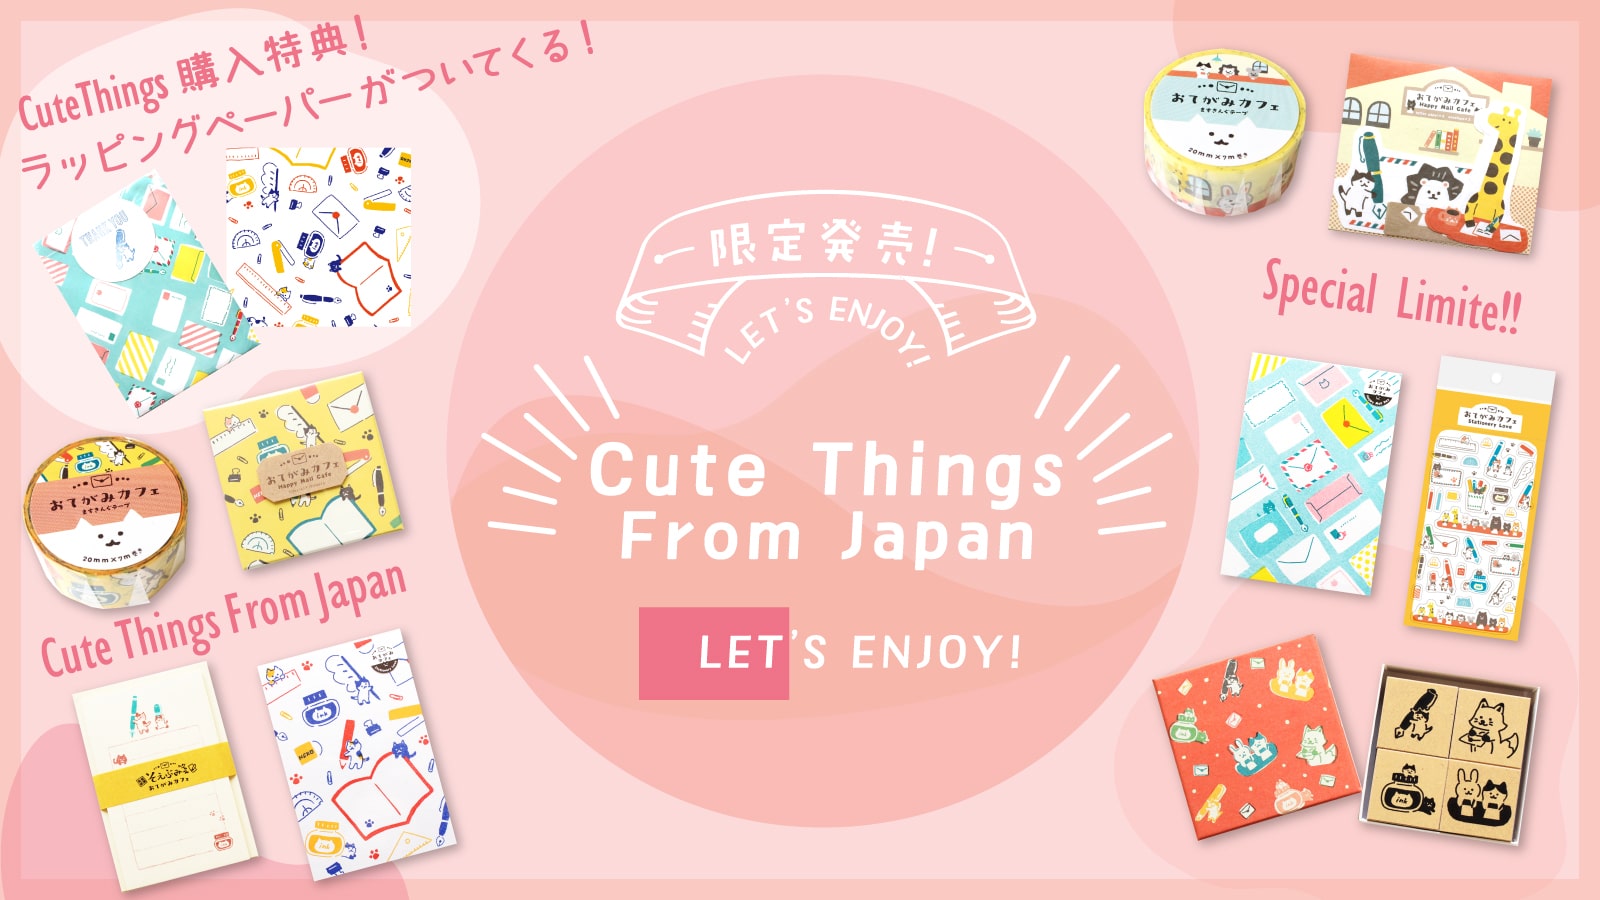 Cute Things from Japanコラボ商品のご案内